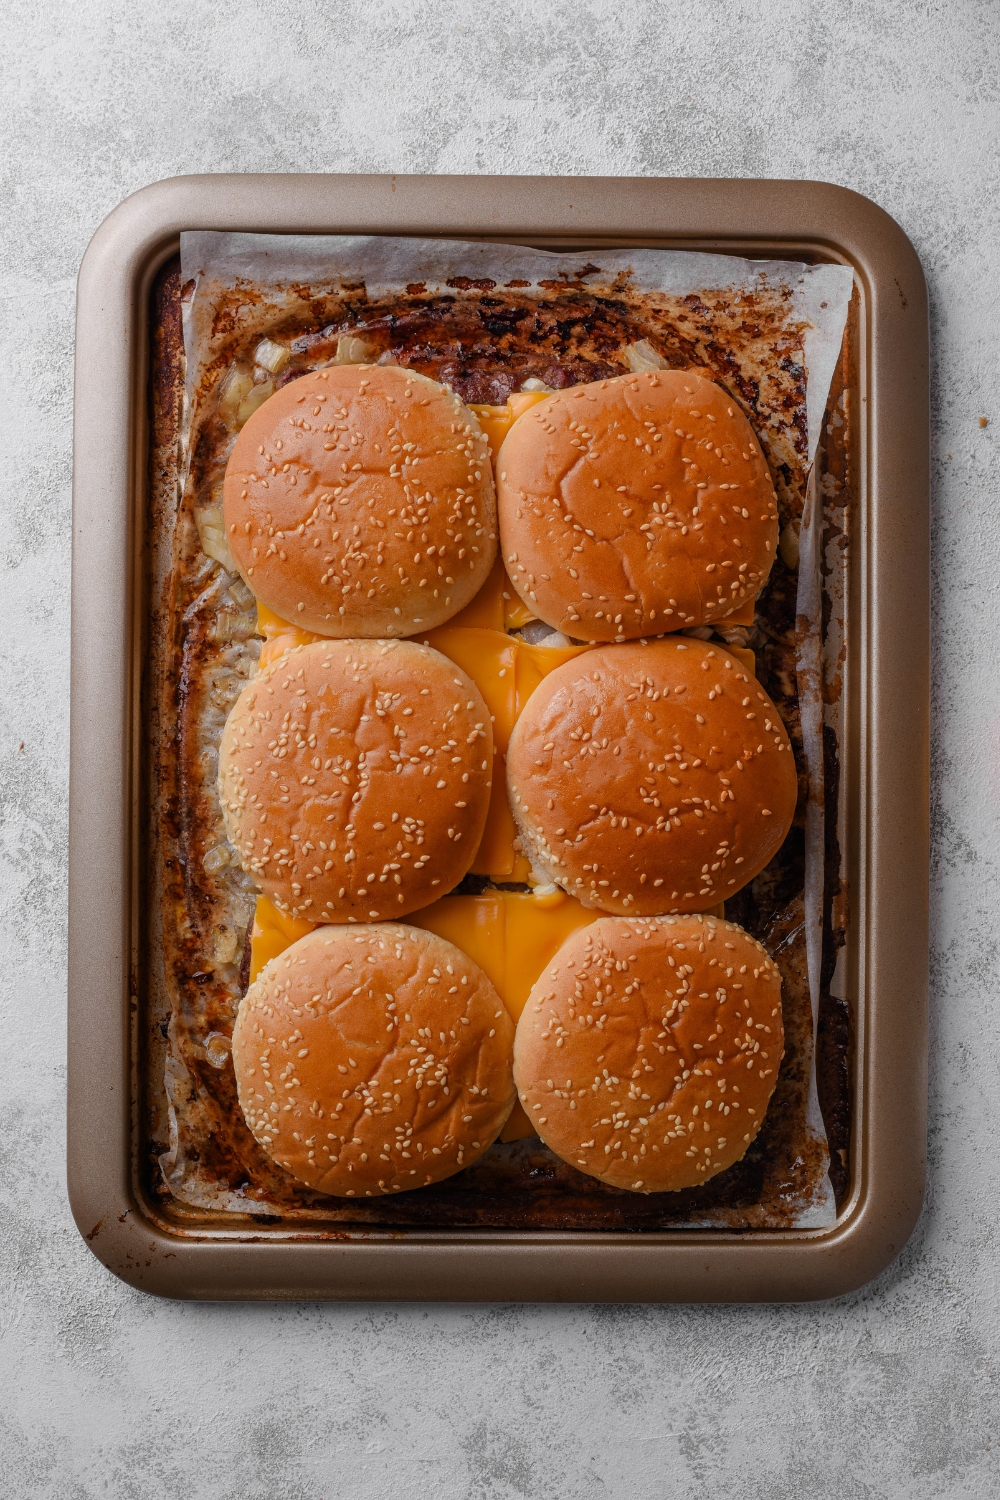 A parchment paper lined baking tray holds white castle sliders with top buns.